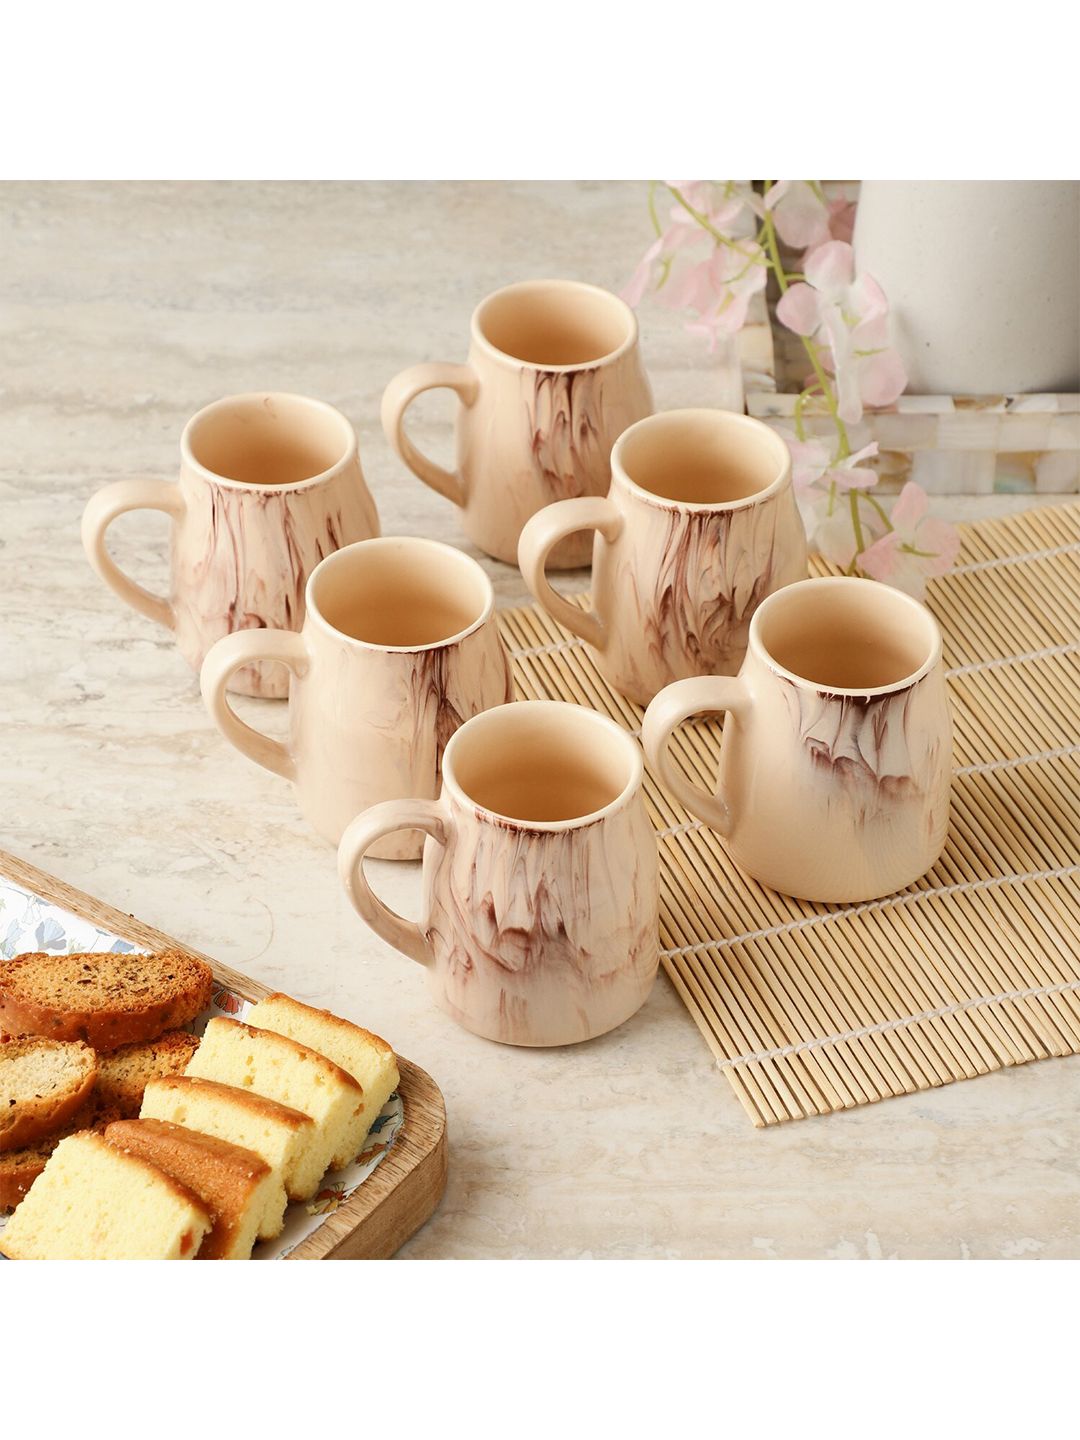 The Decor Mart White & Brown Printed Ceramic Glossy Cups Set of Cups and Mugs Price in India